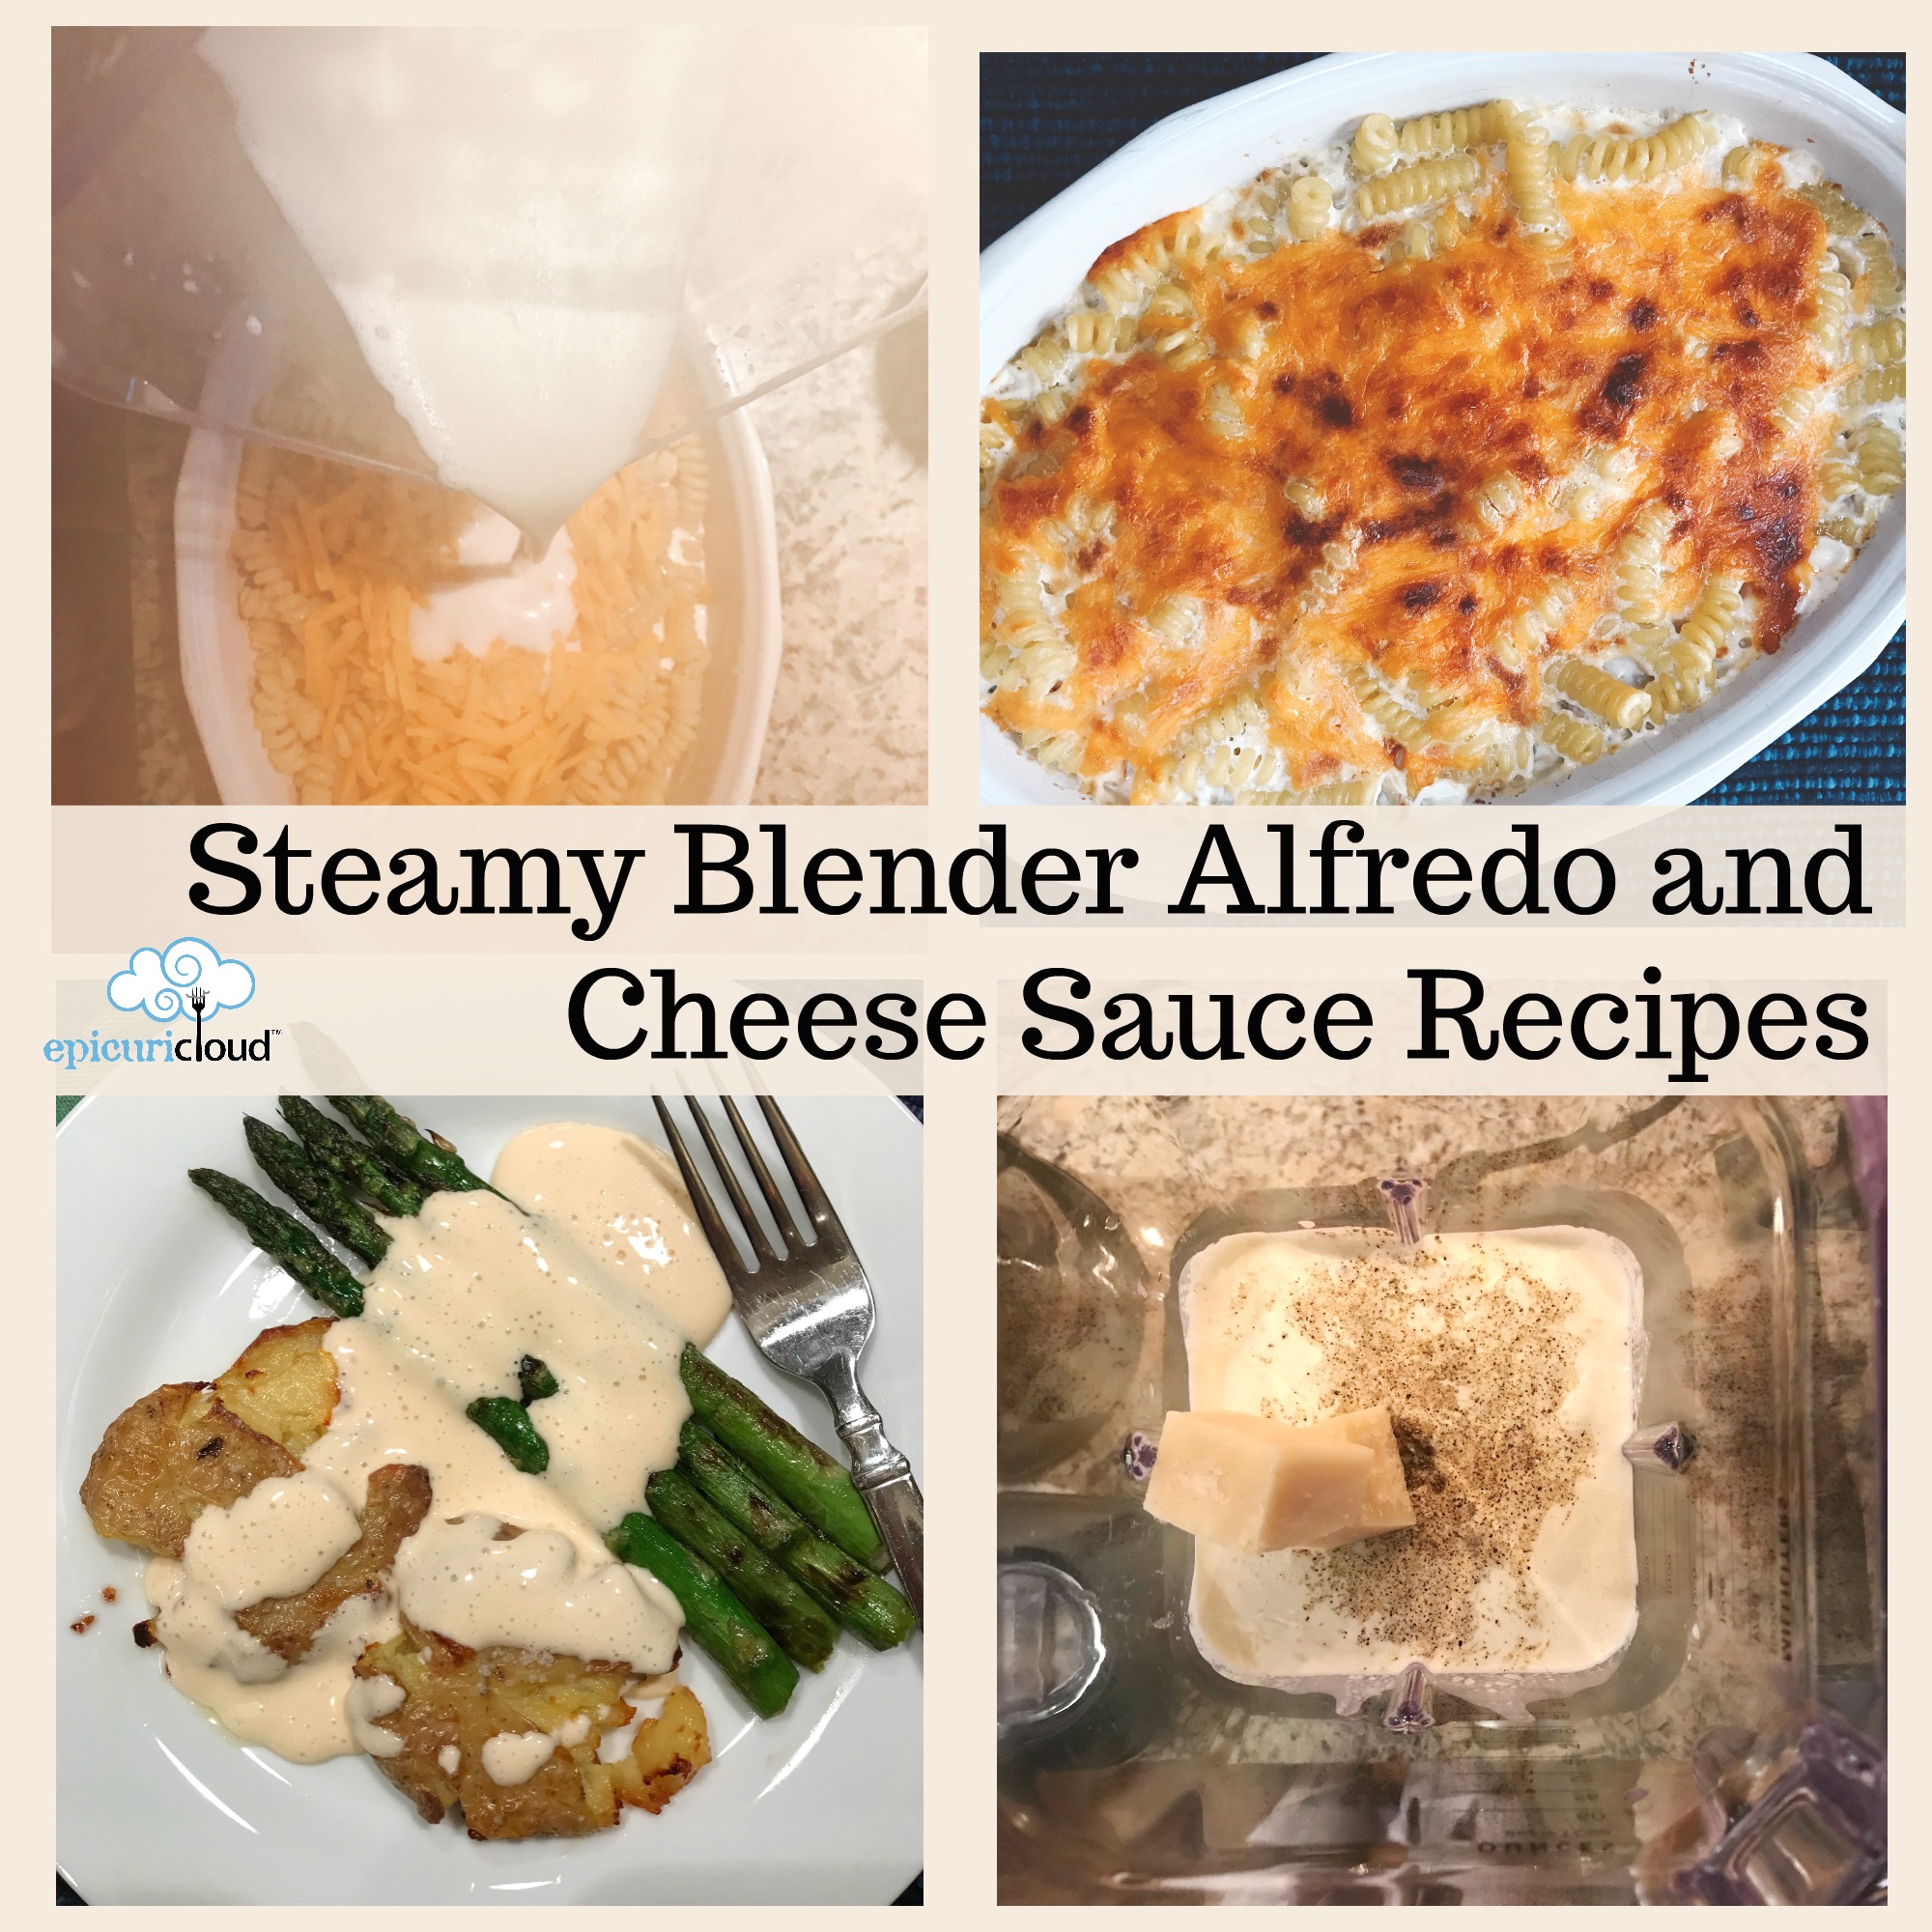 Steamy Blender Alfredo Sauce and Cheddar Cheese Sauce